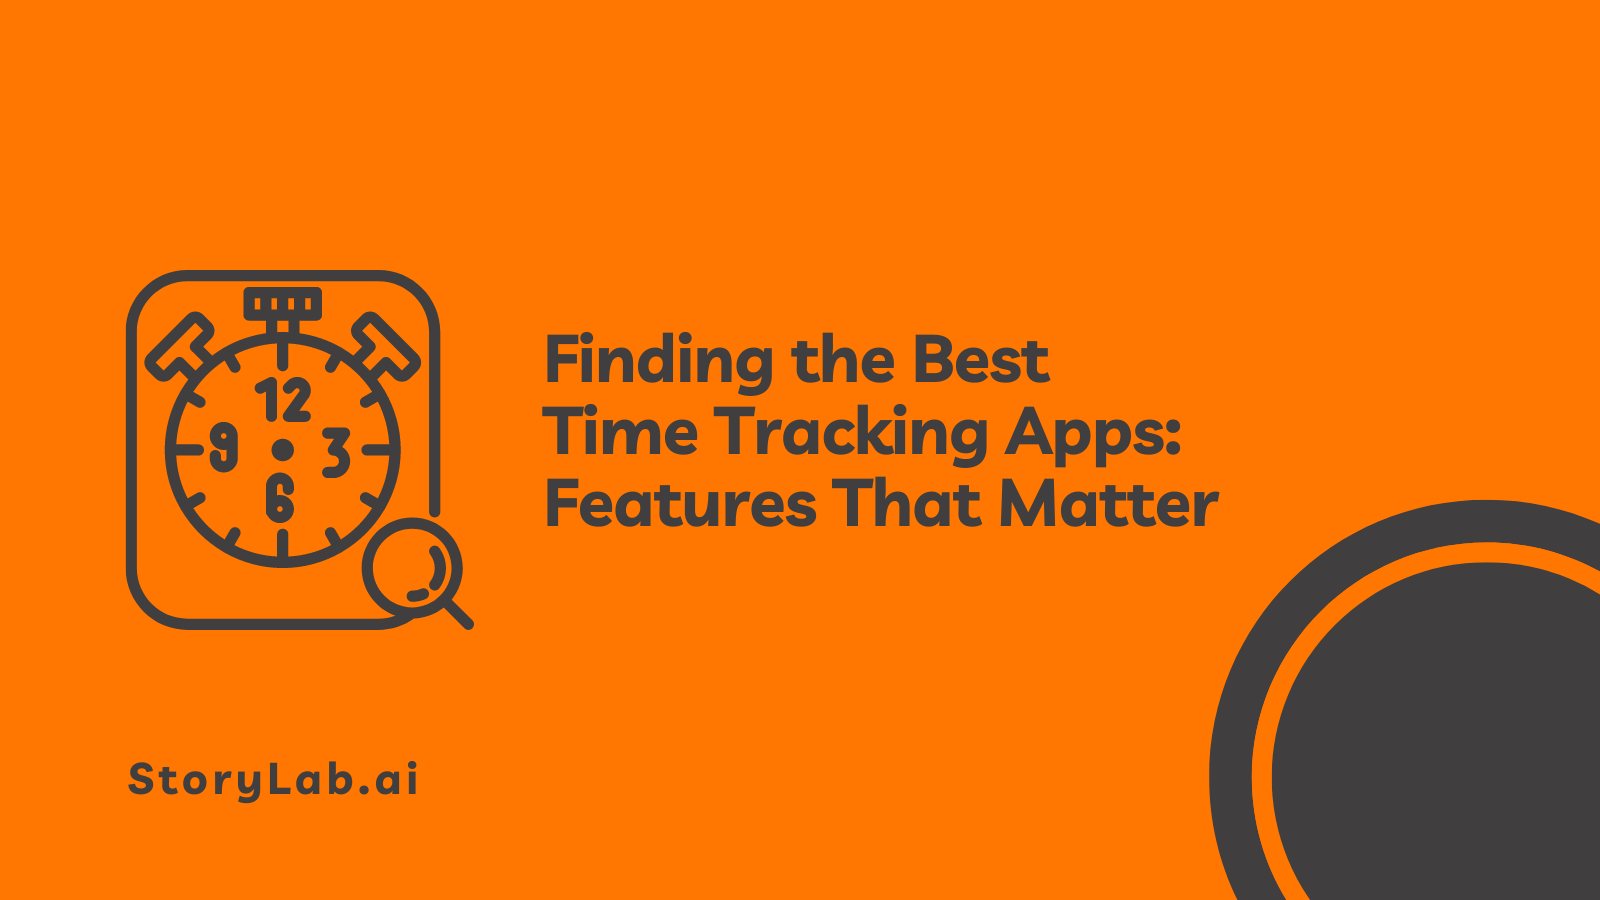 Finding the Best Time Tracking Apps: Features That Matter